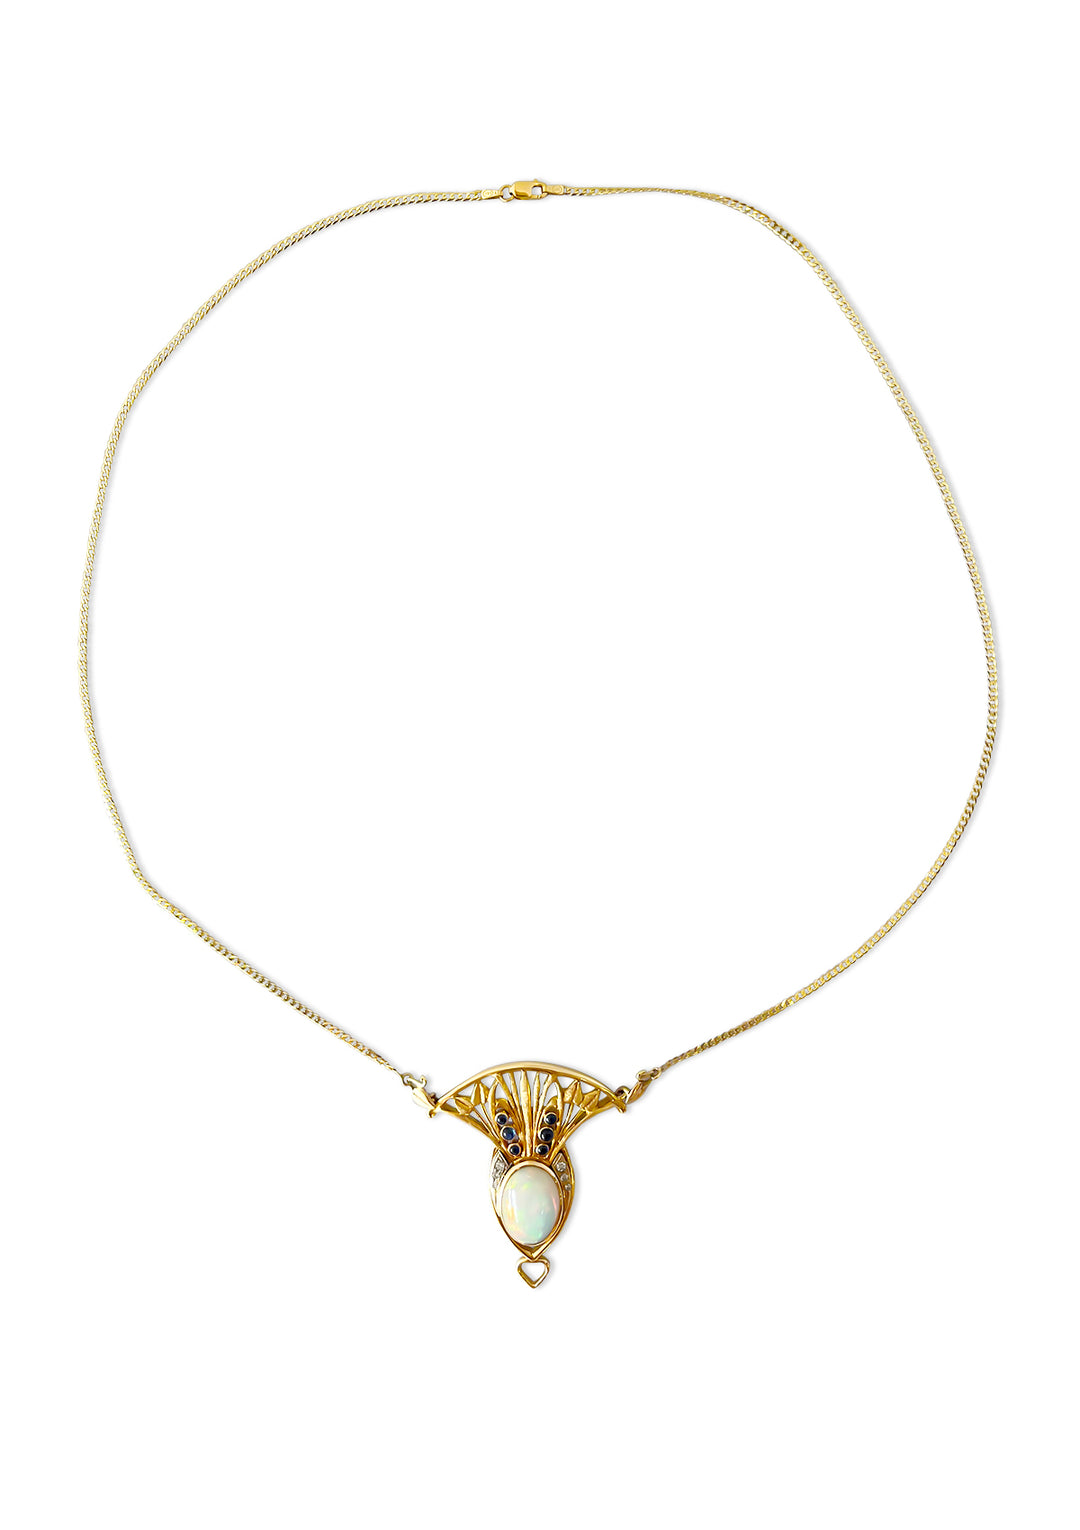 14K Yellow Gold 9.20 Carat Ethiopian Opal, Diamond, And Sapphire Handcrafted Necklace